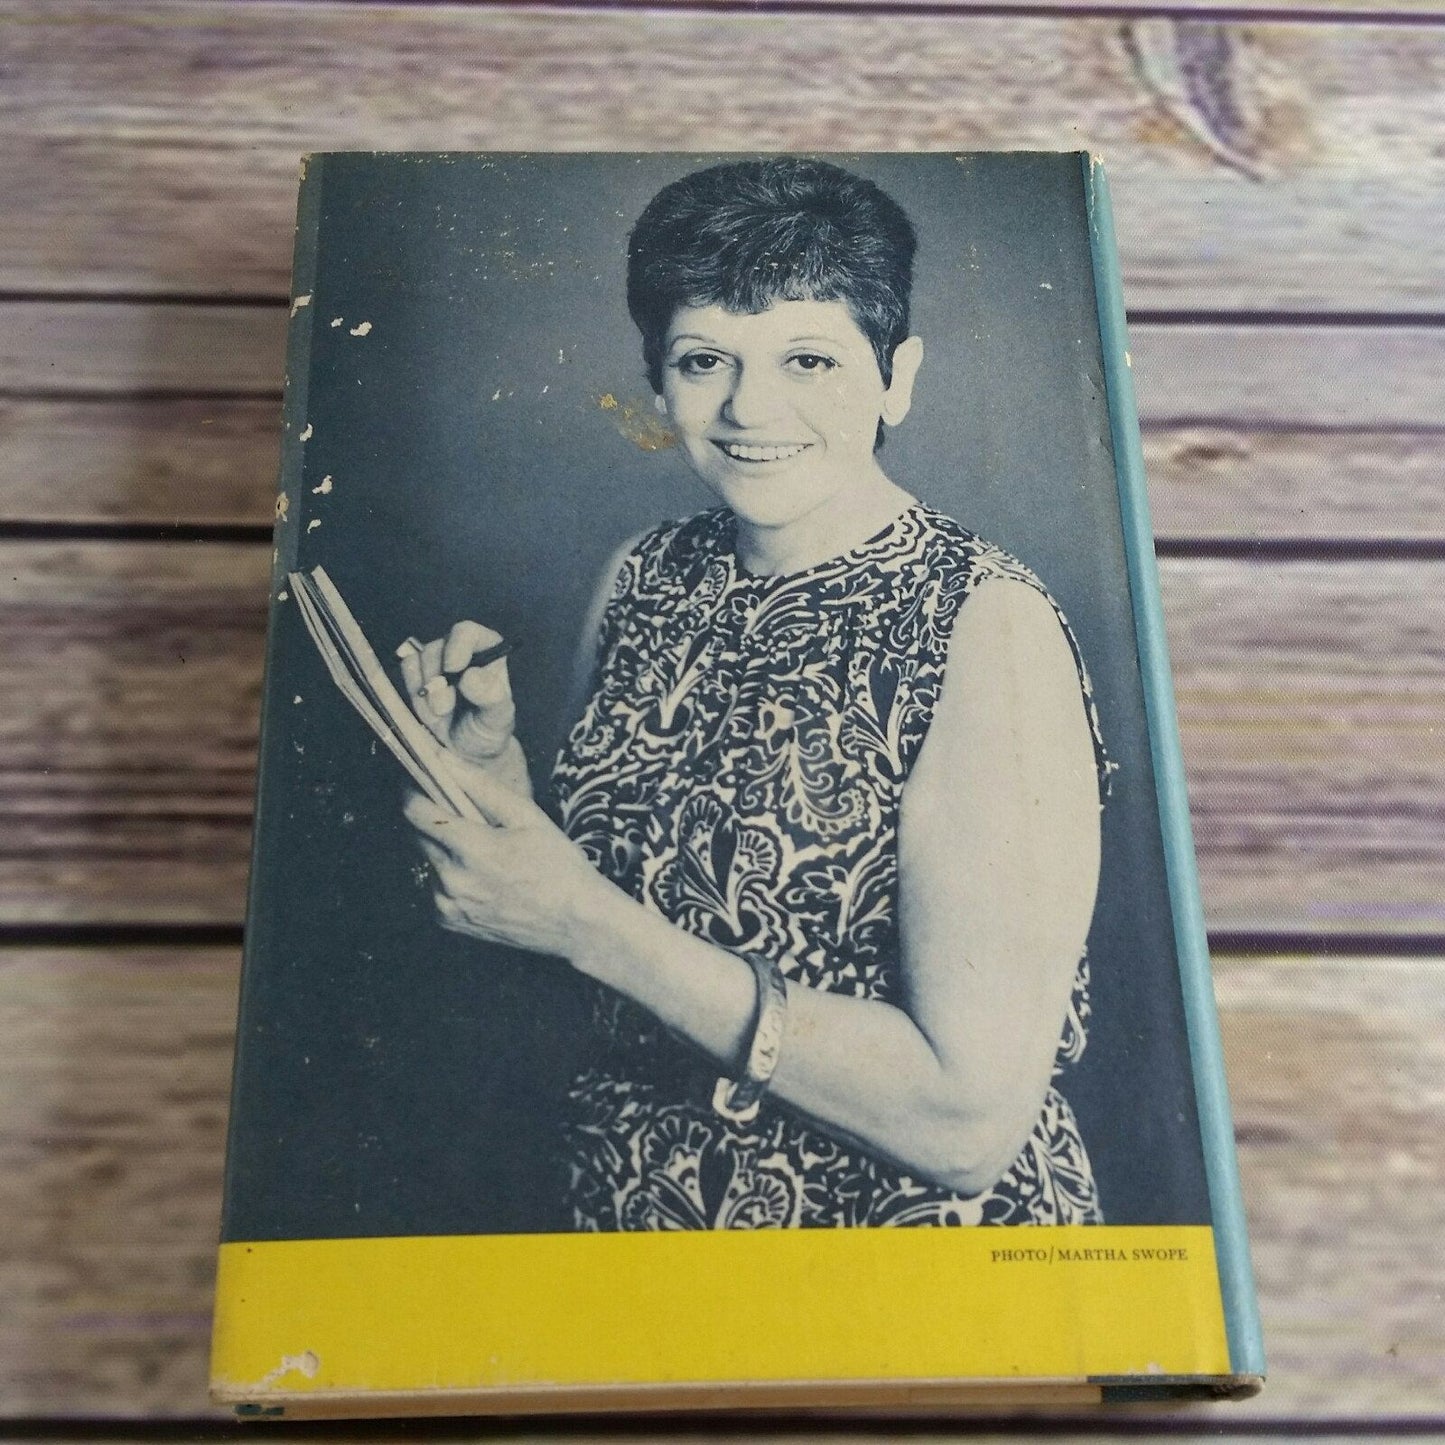 Vintage Seafood Cookbook of the Seven Seas Recipes 1968 Dagmar Freuchen Hardcover with Dust Jacket